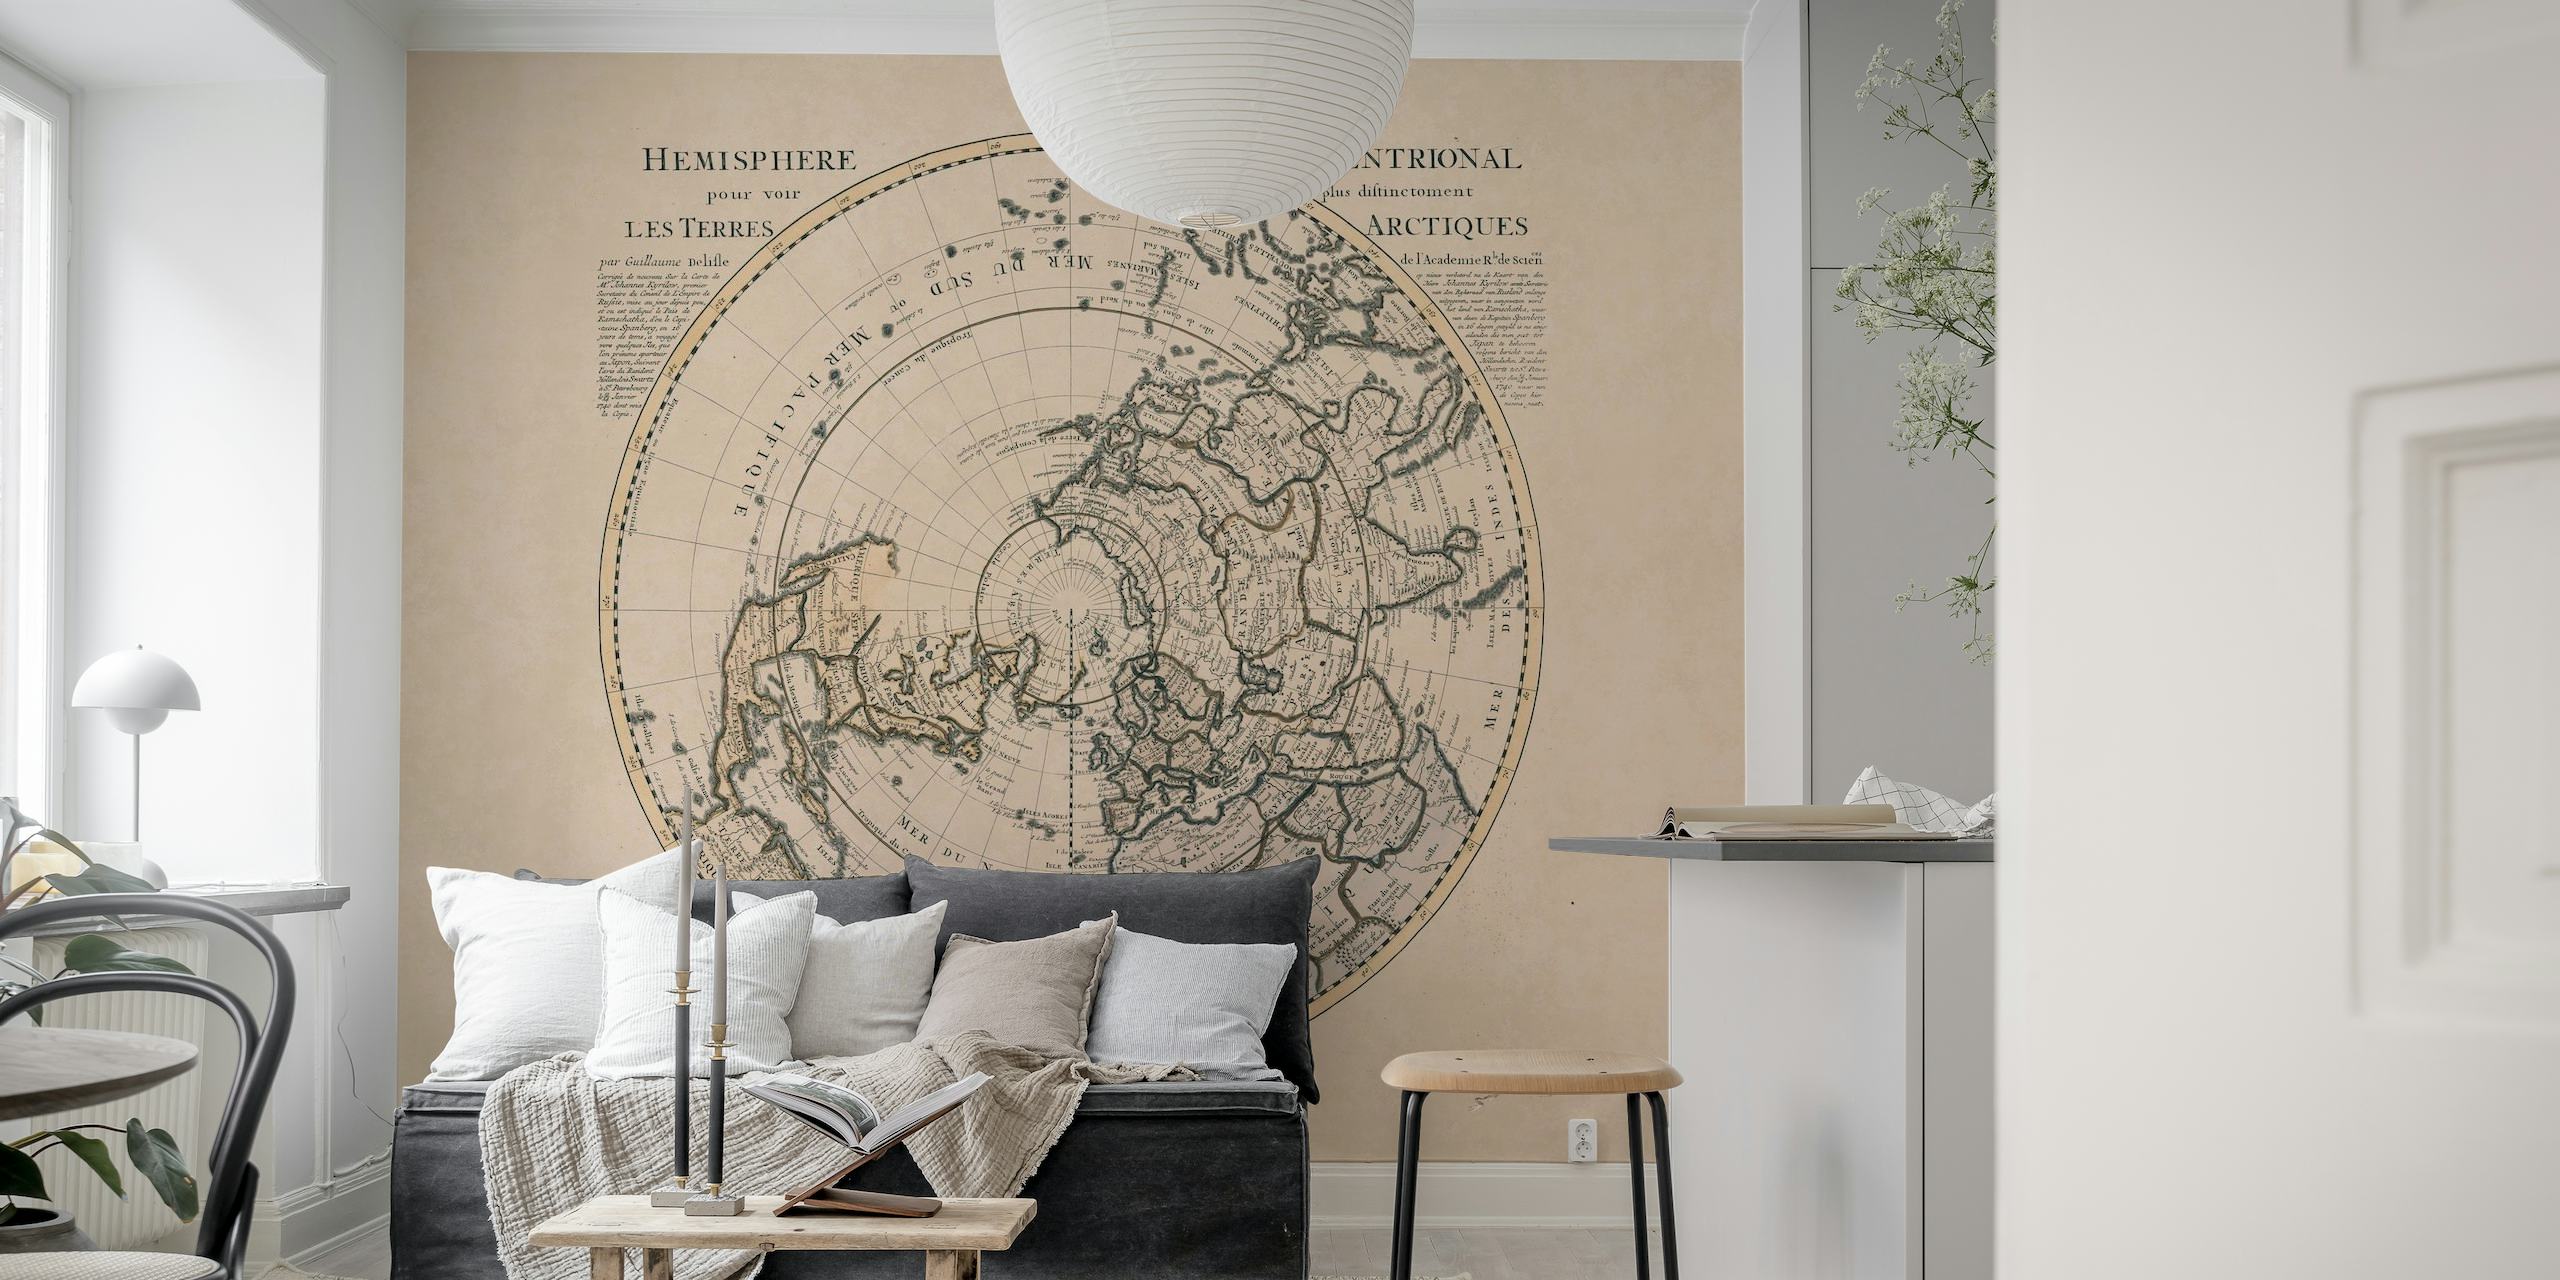 Antique-style map of the Northern Hemisphere wall mural in sepia tones